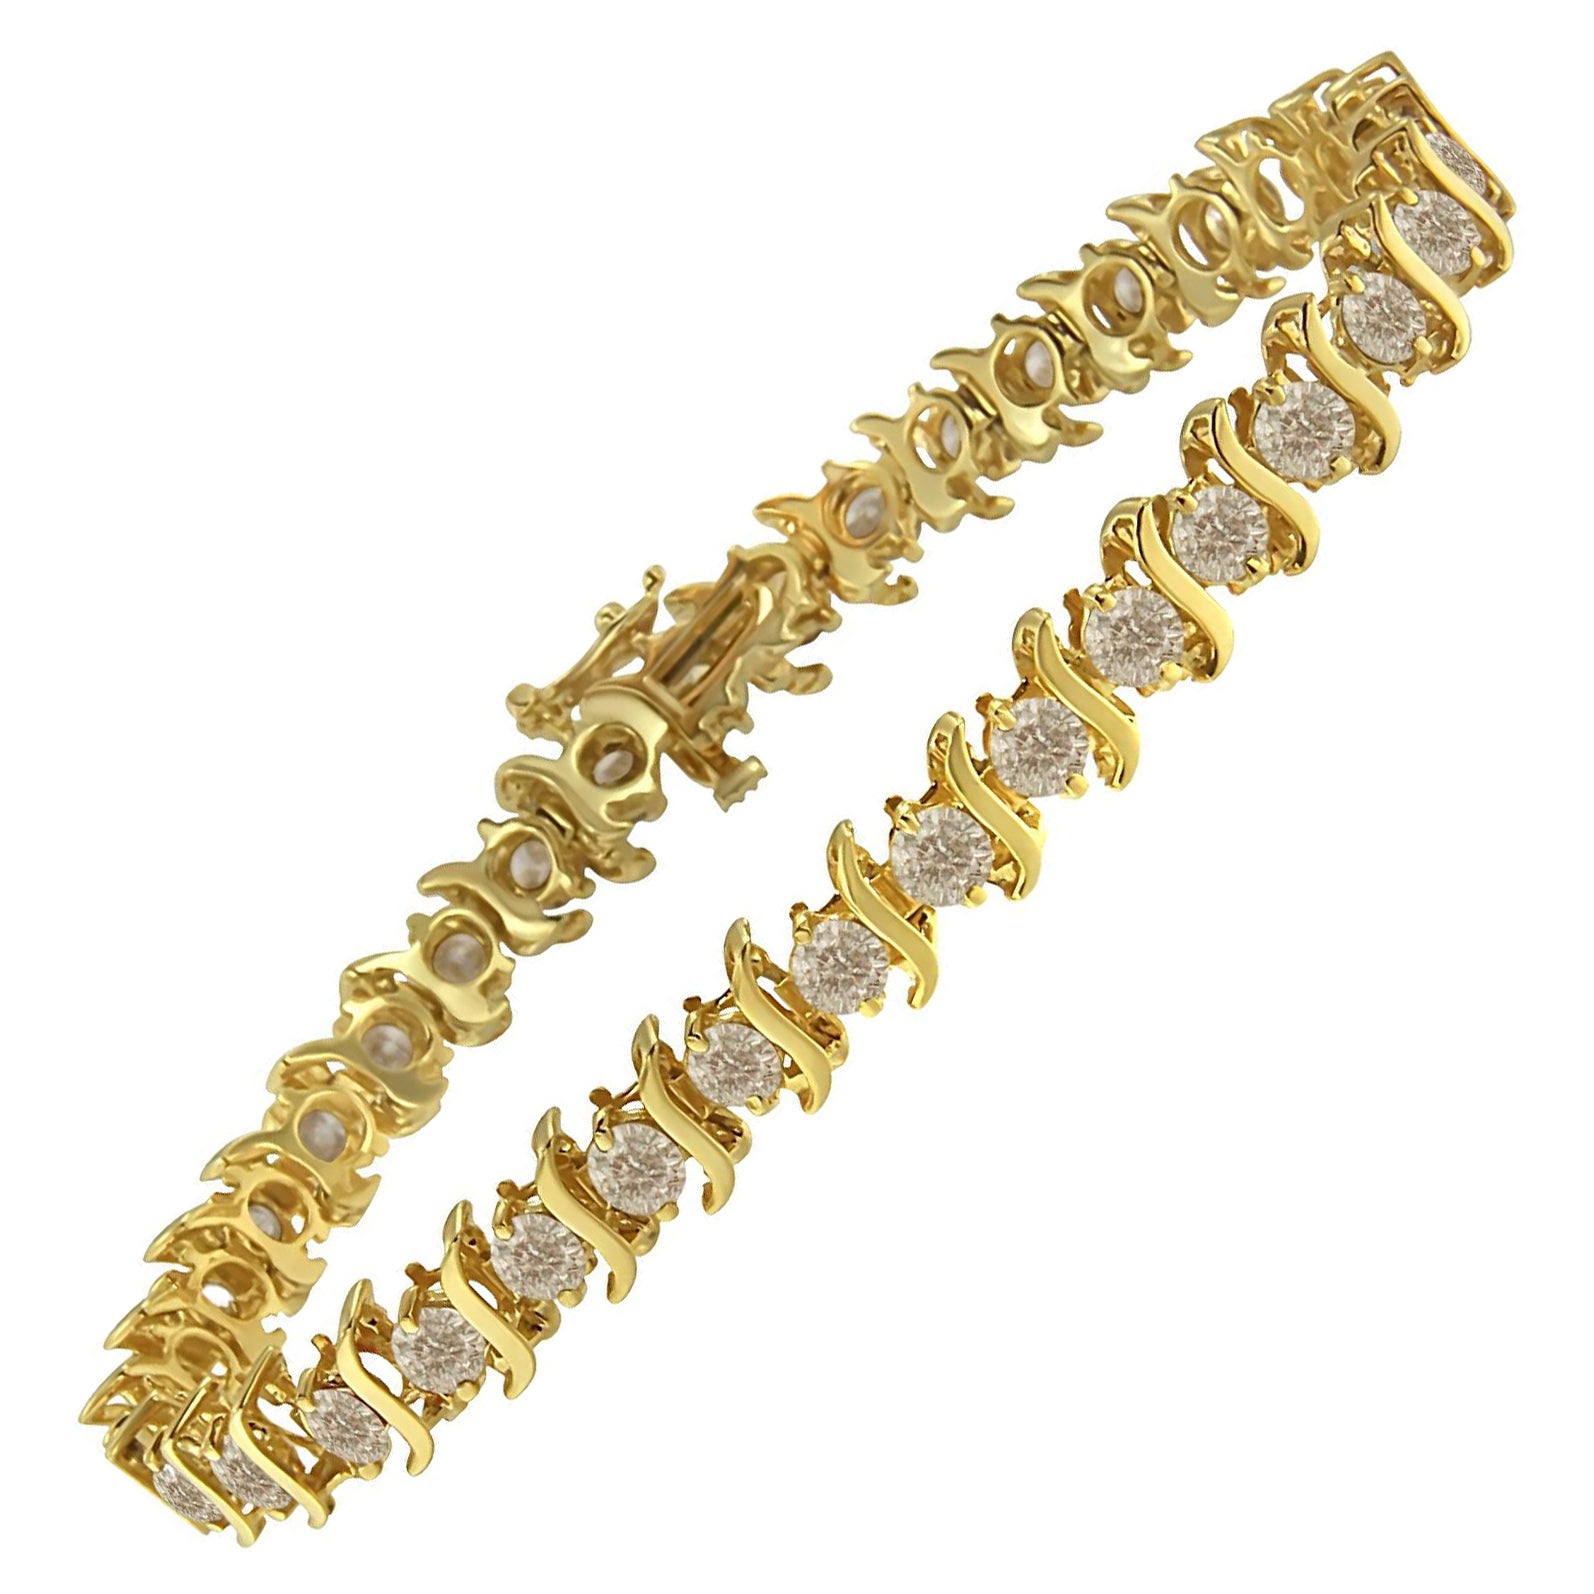 Yellow Gold-Plated Sterling Silver 7.0 Carat Diamond "S" Link Tennis Bracelet For Sale